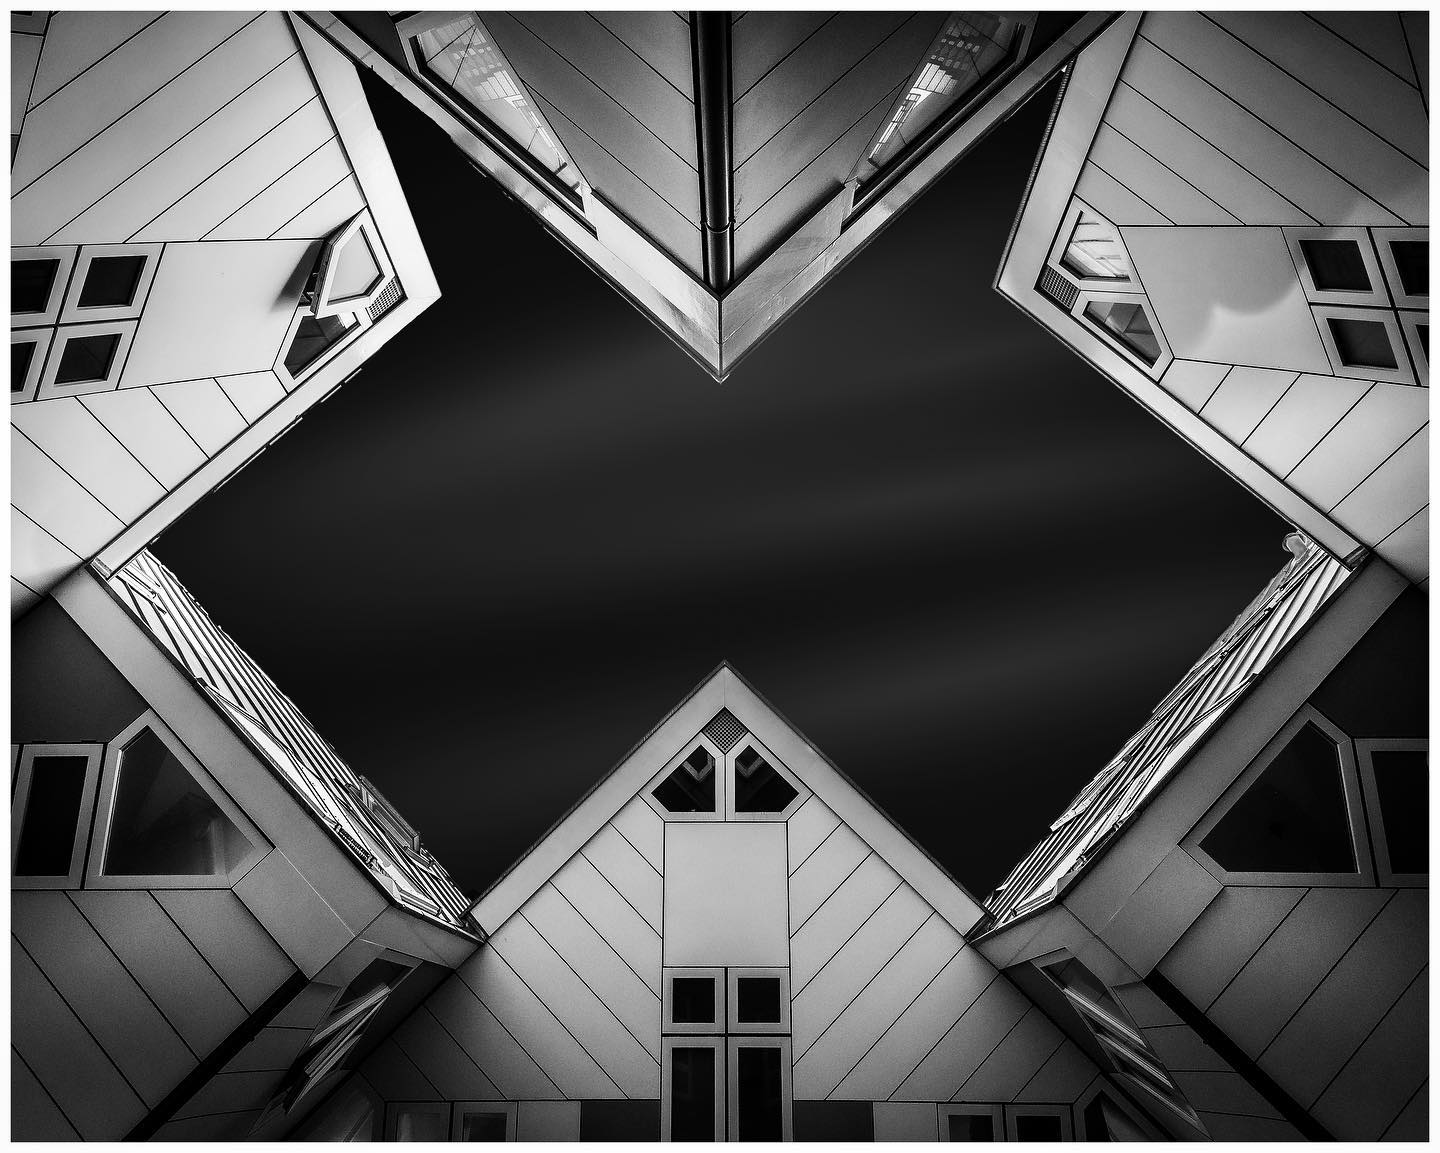 dark cubes Taken during a visit to Amsterdam. Besides being an exquisite piece of architecture the cubes allow us for an infinity of interesting angles and photo possibilities #rotterdam #travel #architecture #architecturelovers #architecturephotography #archidaily #architexture #minimalarchitecture #arquitectura #bwfineartphotography #nikontop #nikoneurope #nikonshooters #olharescom #youpic #photocrowd #bnw_rose #weare500px #gurushots #bw_architecture #monochrome #streetphotography #dcwow #raw_architecture @minimal_lookup #raw_bnw @architectonics_world @creative_architecture @icu_architecture @nikonbelgium @raw_architecture_